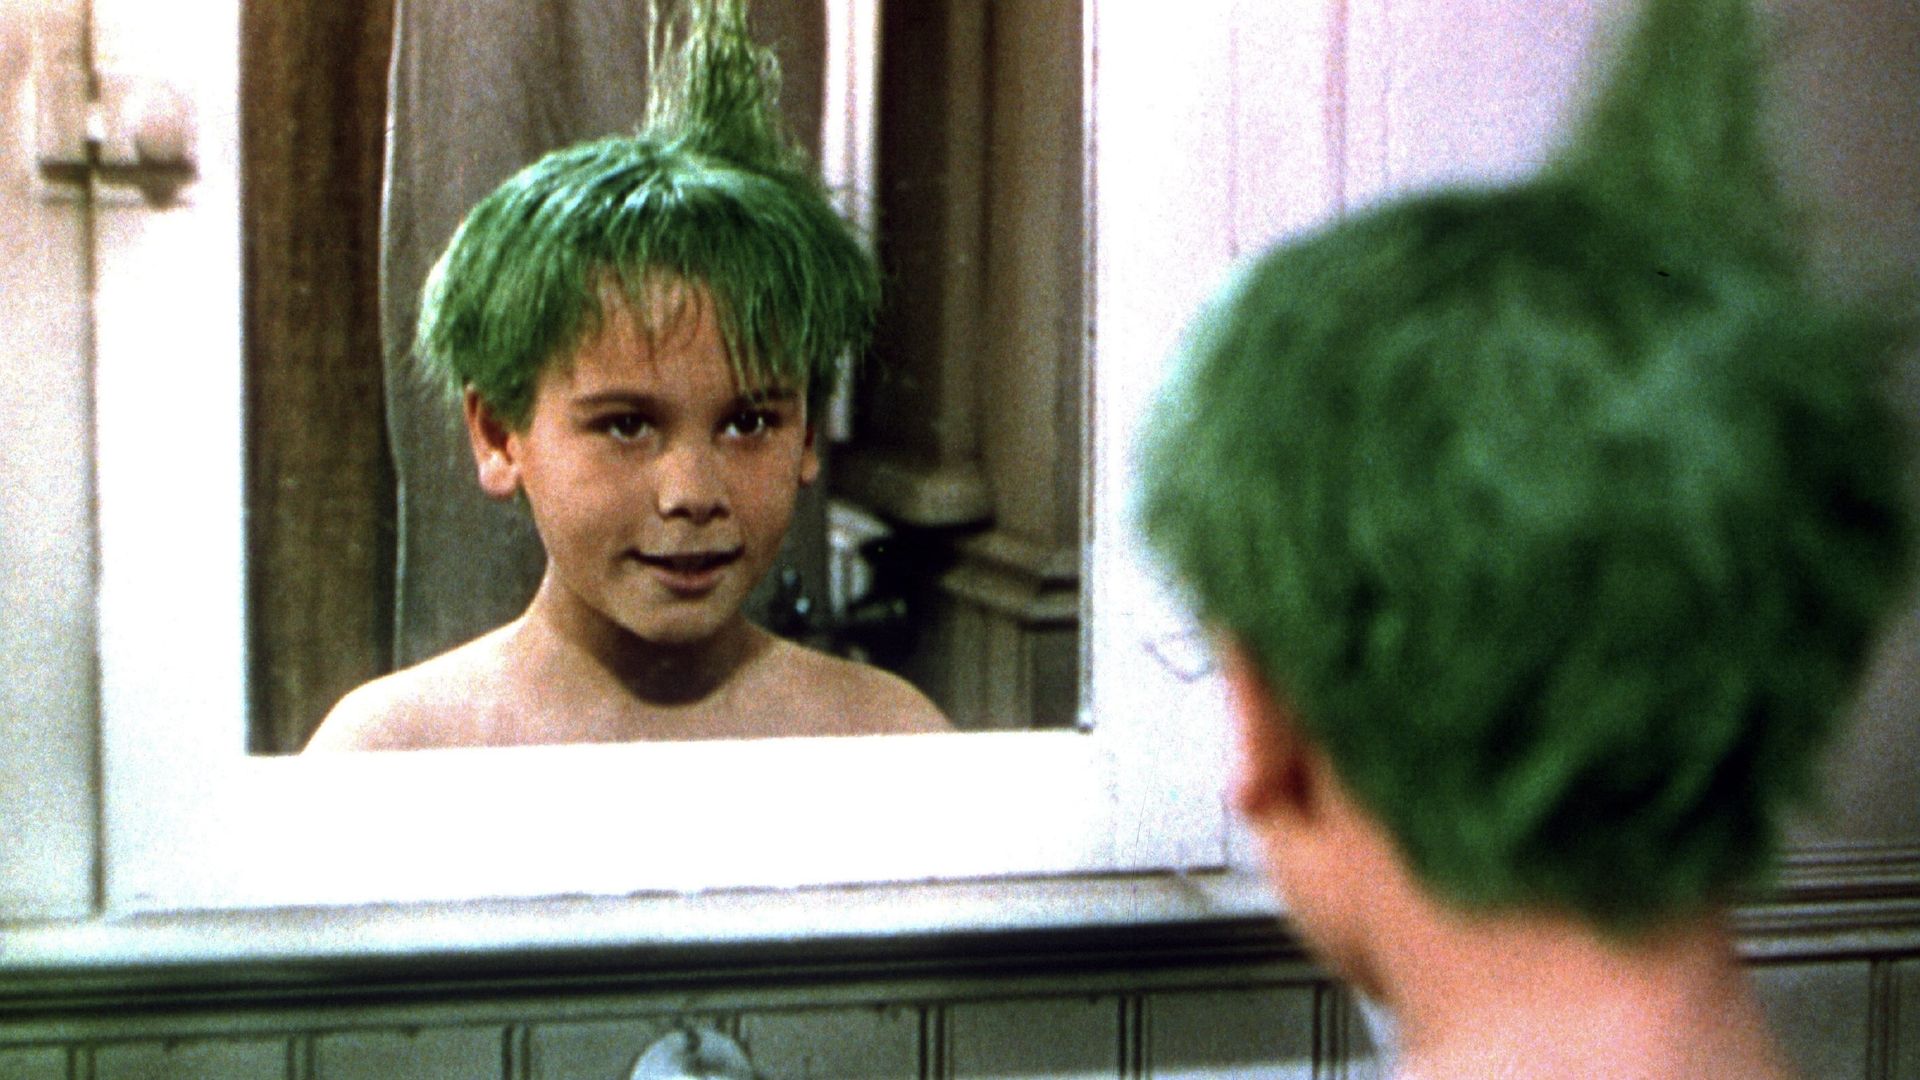 The Boy with Green Hair background